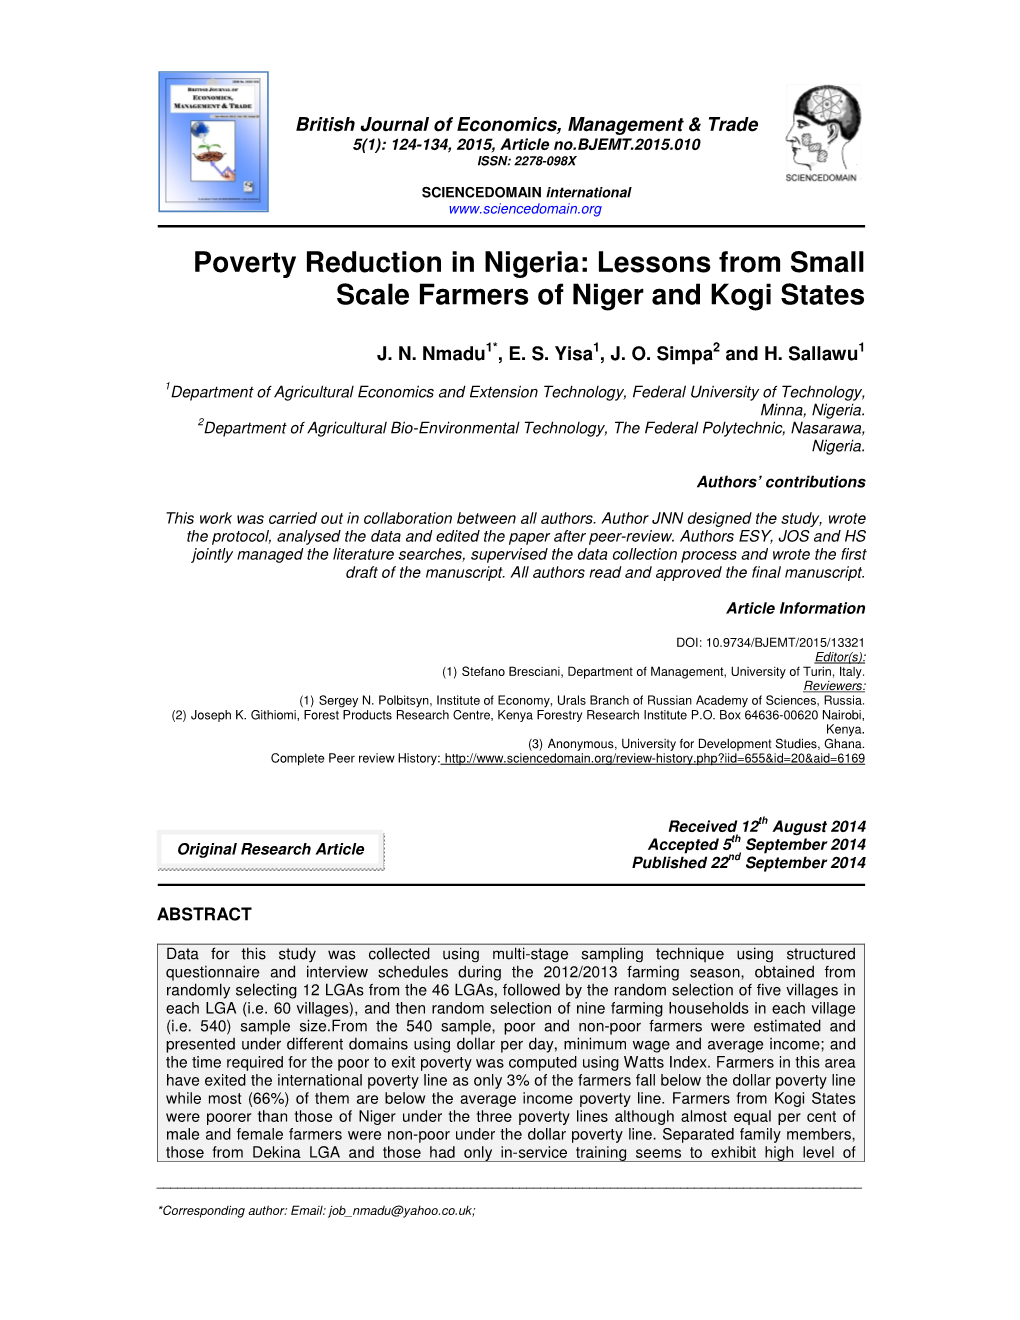 Poverty Reduction in Nigeria: Lessons from Small Scale Farmers of Niger and Kogi States